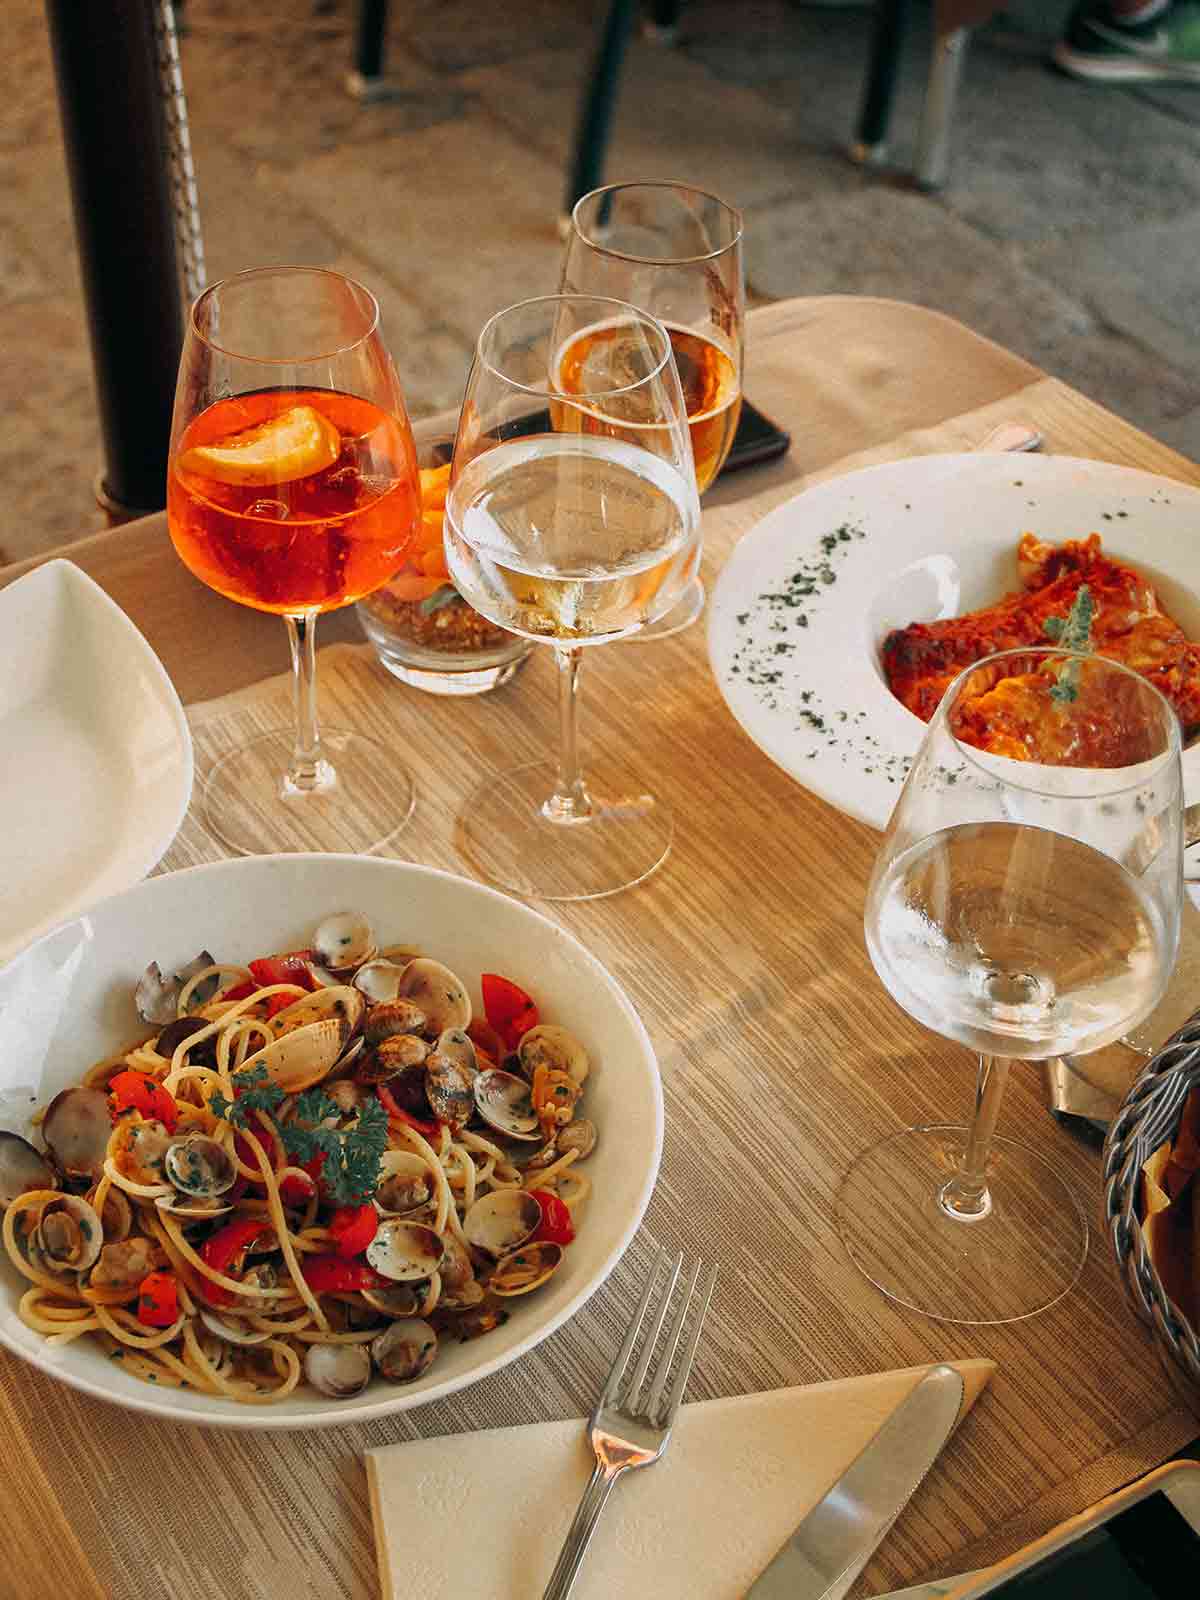 Italian Pasta served with wine in a restaurant at Venice, Italy